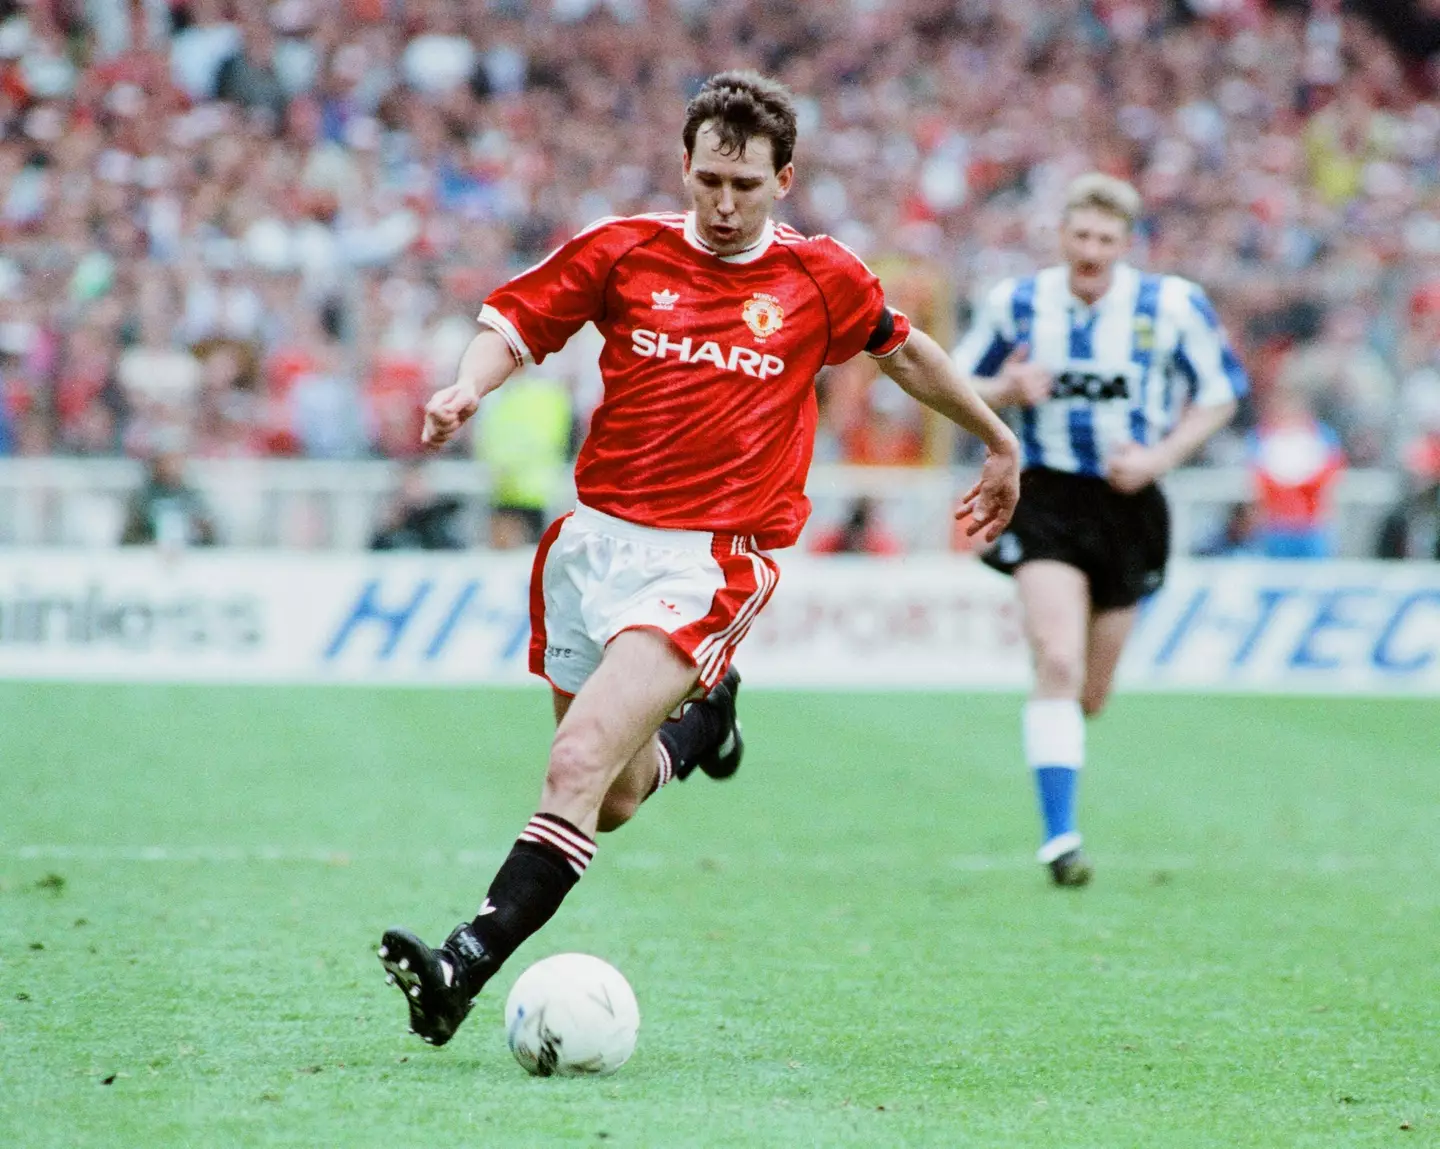 Bryan Robson of Manchester United in 1991 (Alamy)